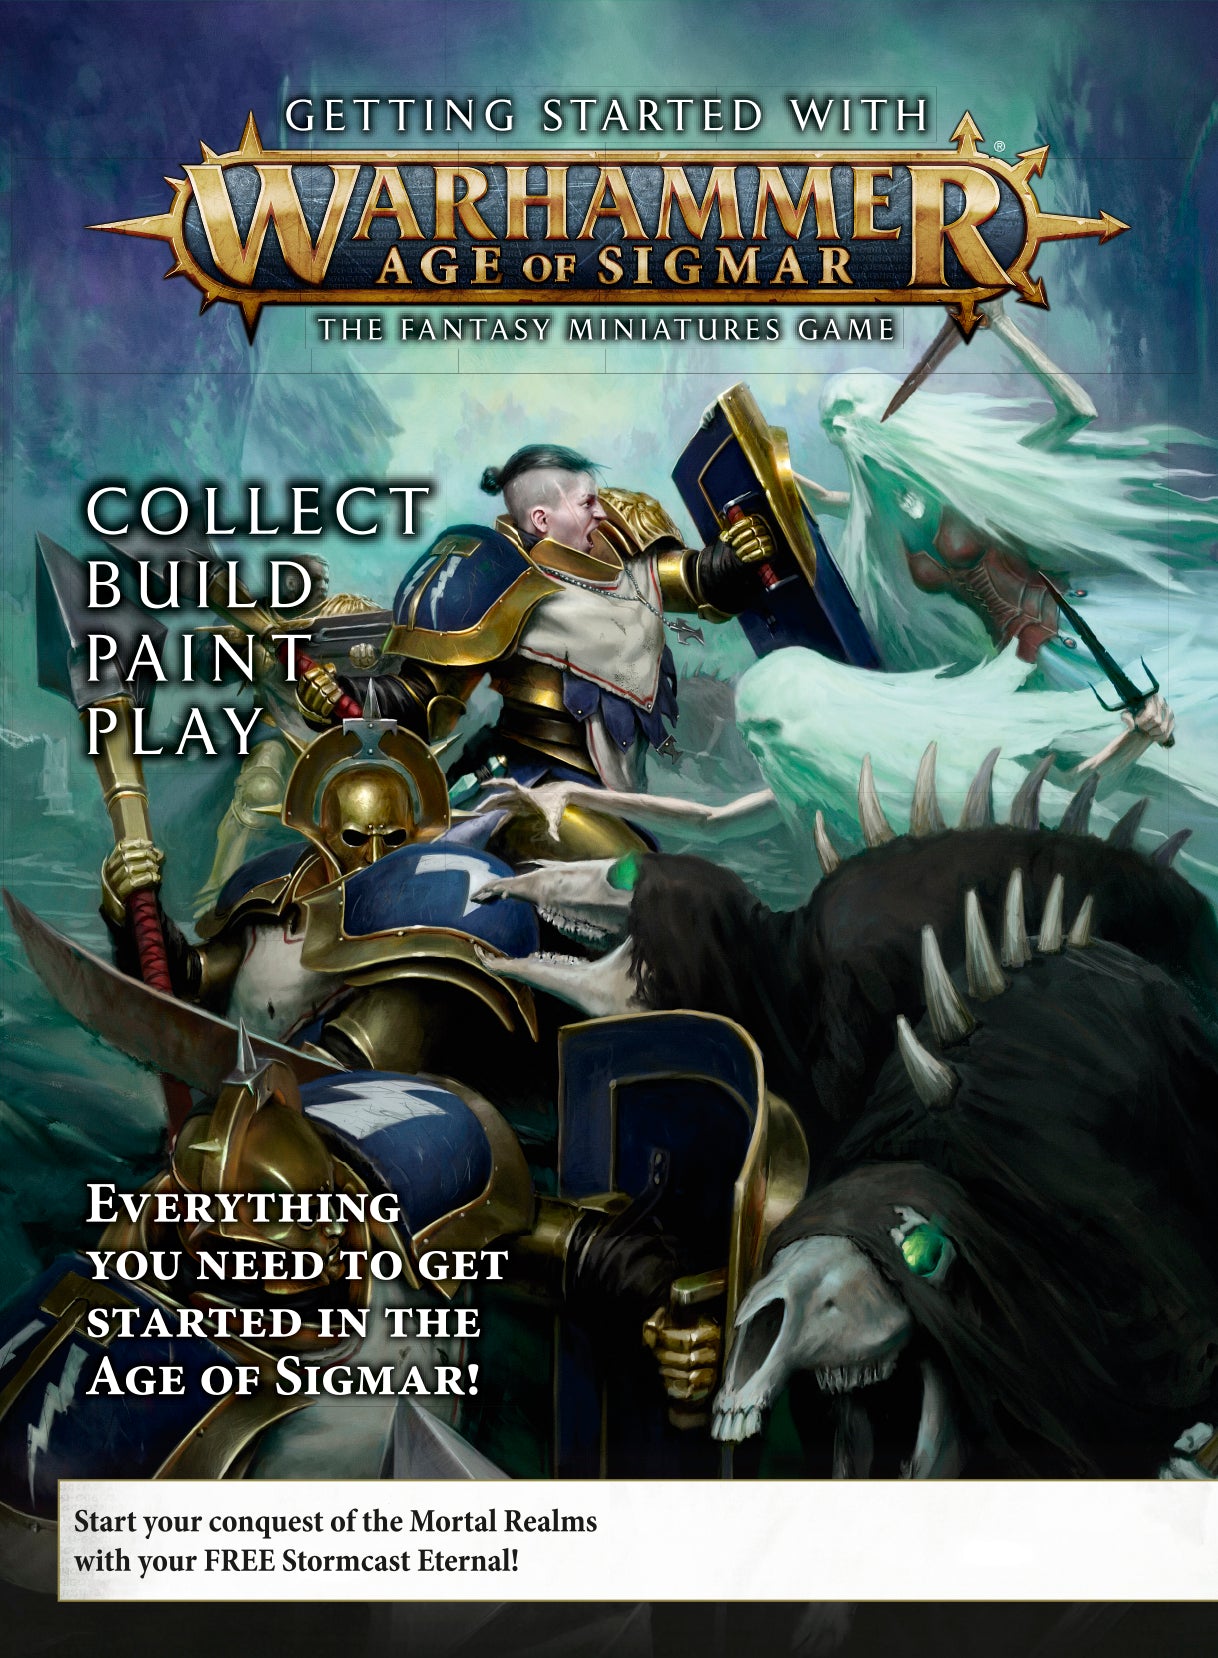 Getting Started with Warhammer Age of Sigmar | Gate City Games LLC